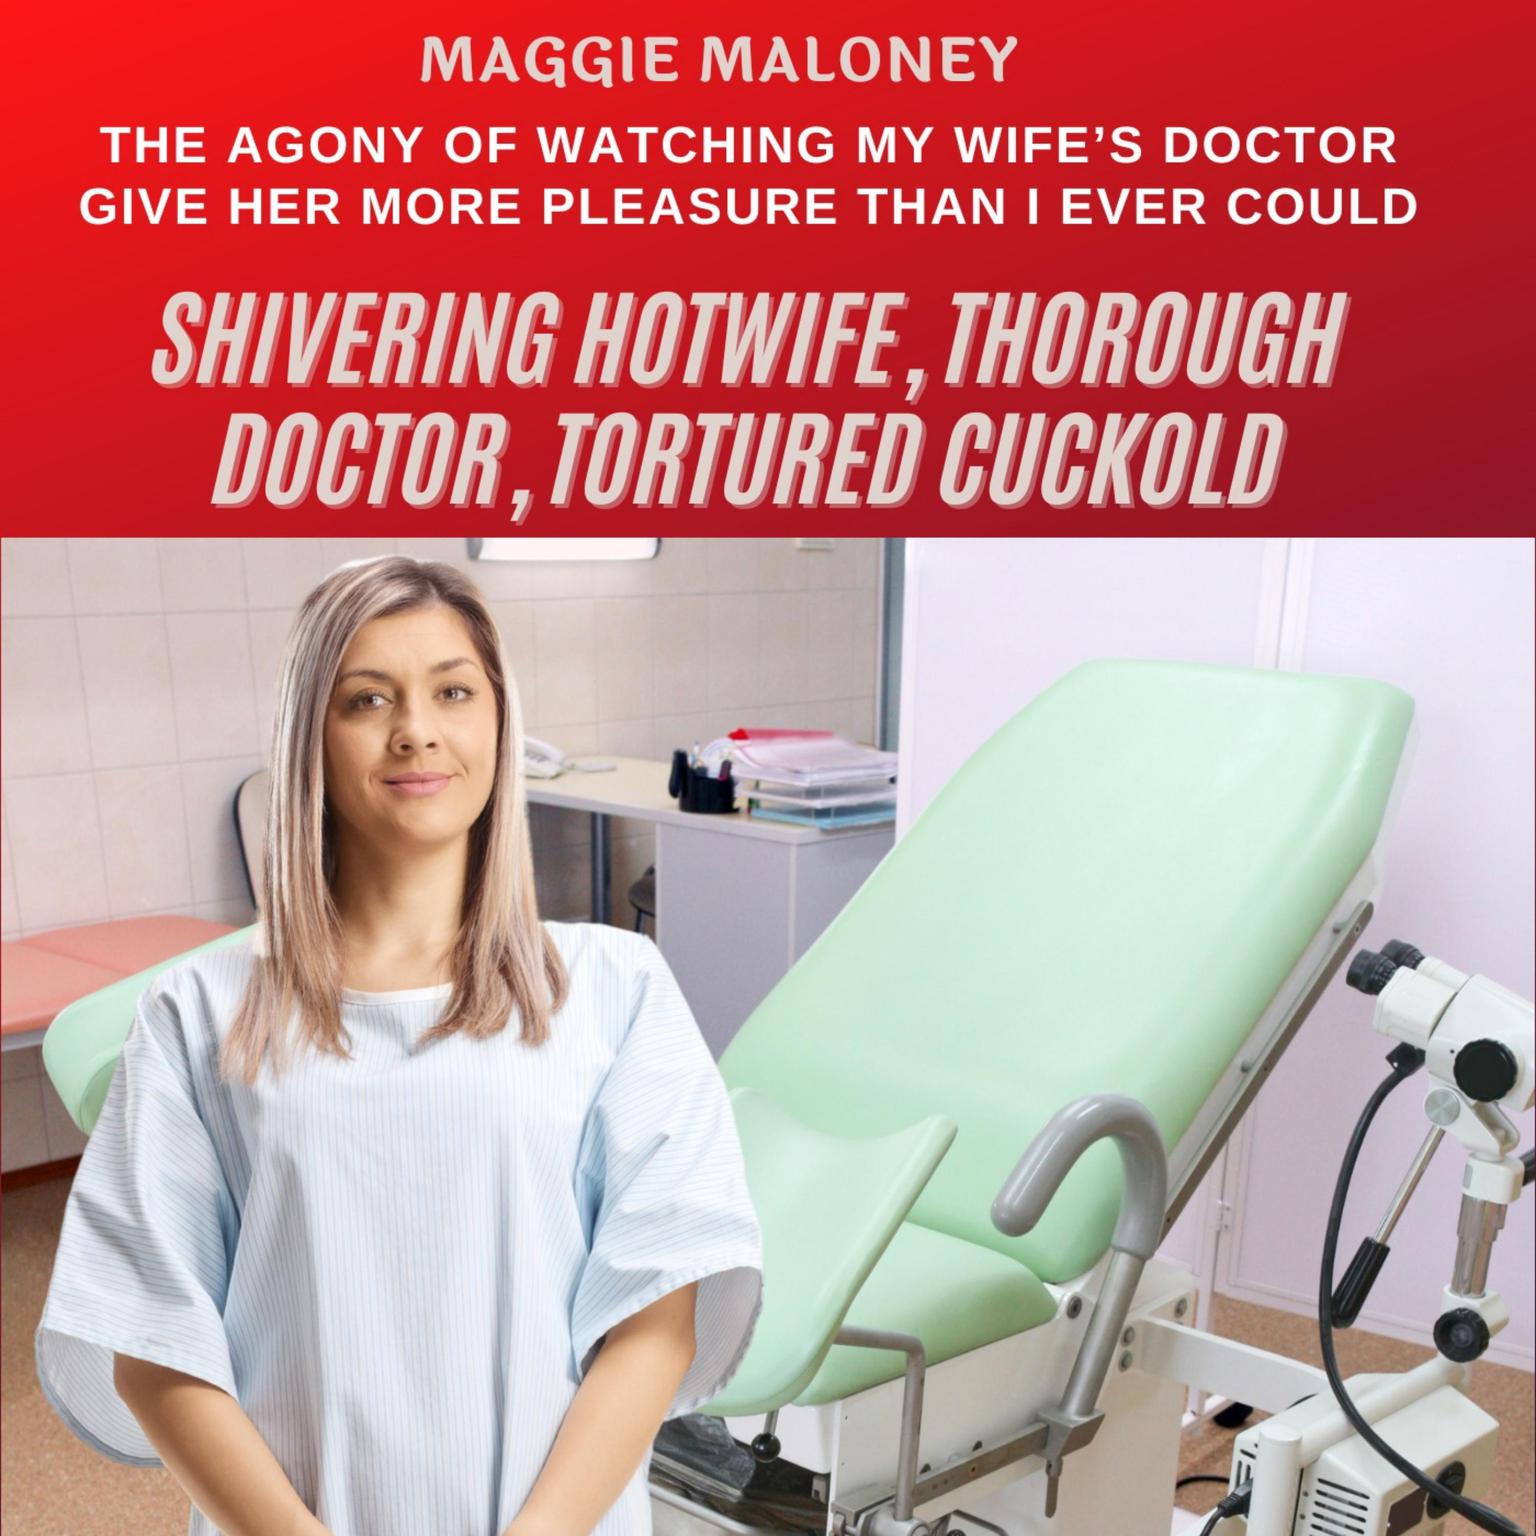 Shivering Hotwife, Thorough Doctor, Tortured Cuckold: The Agony of Watching My Wife’s Doctor Give Her More Pleasure Than I Ever Could Audiobook, by Maggie Maloney